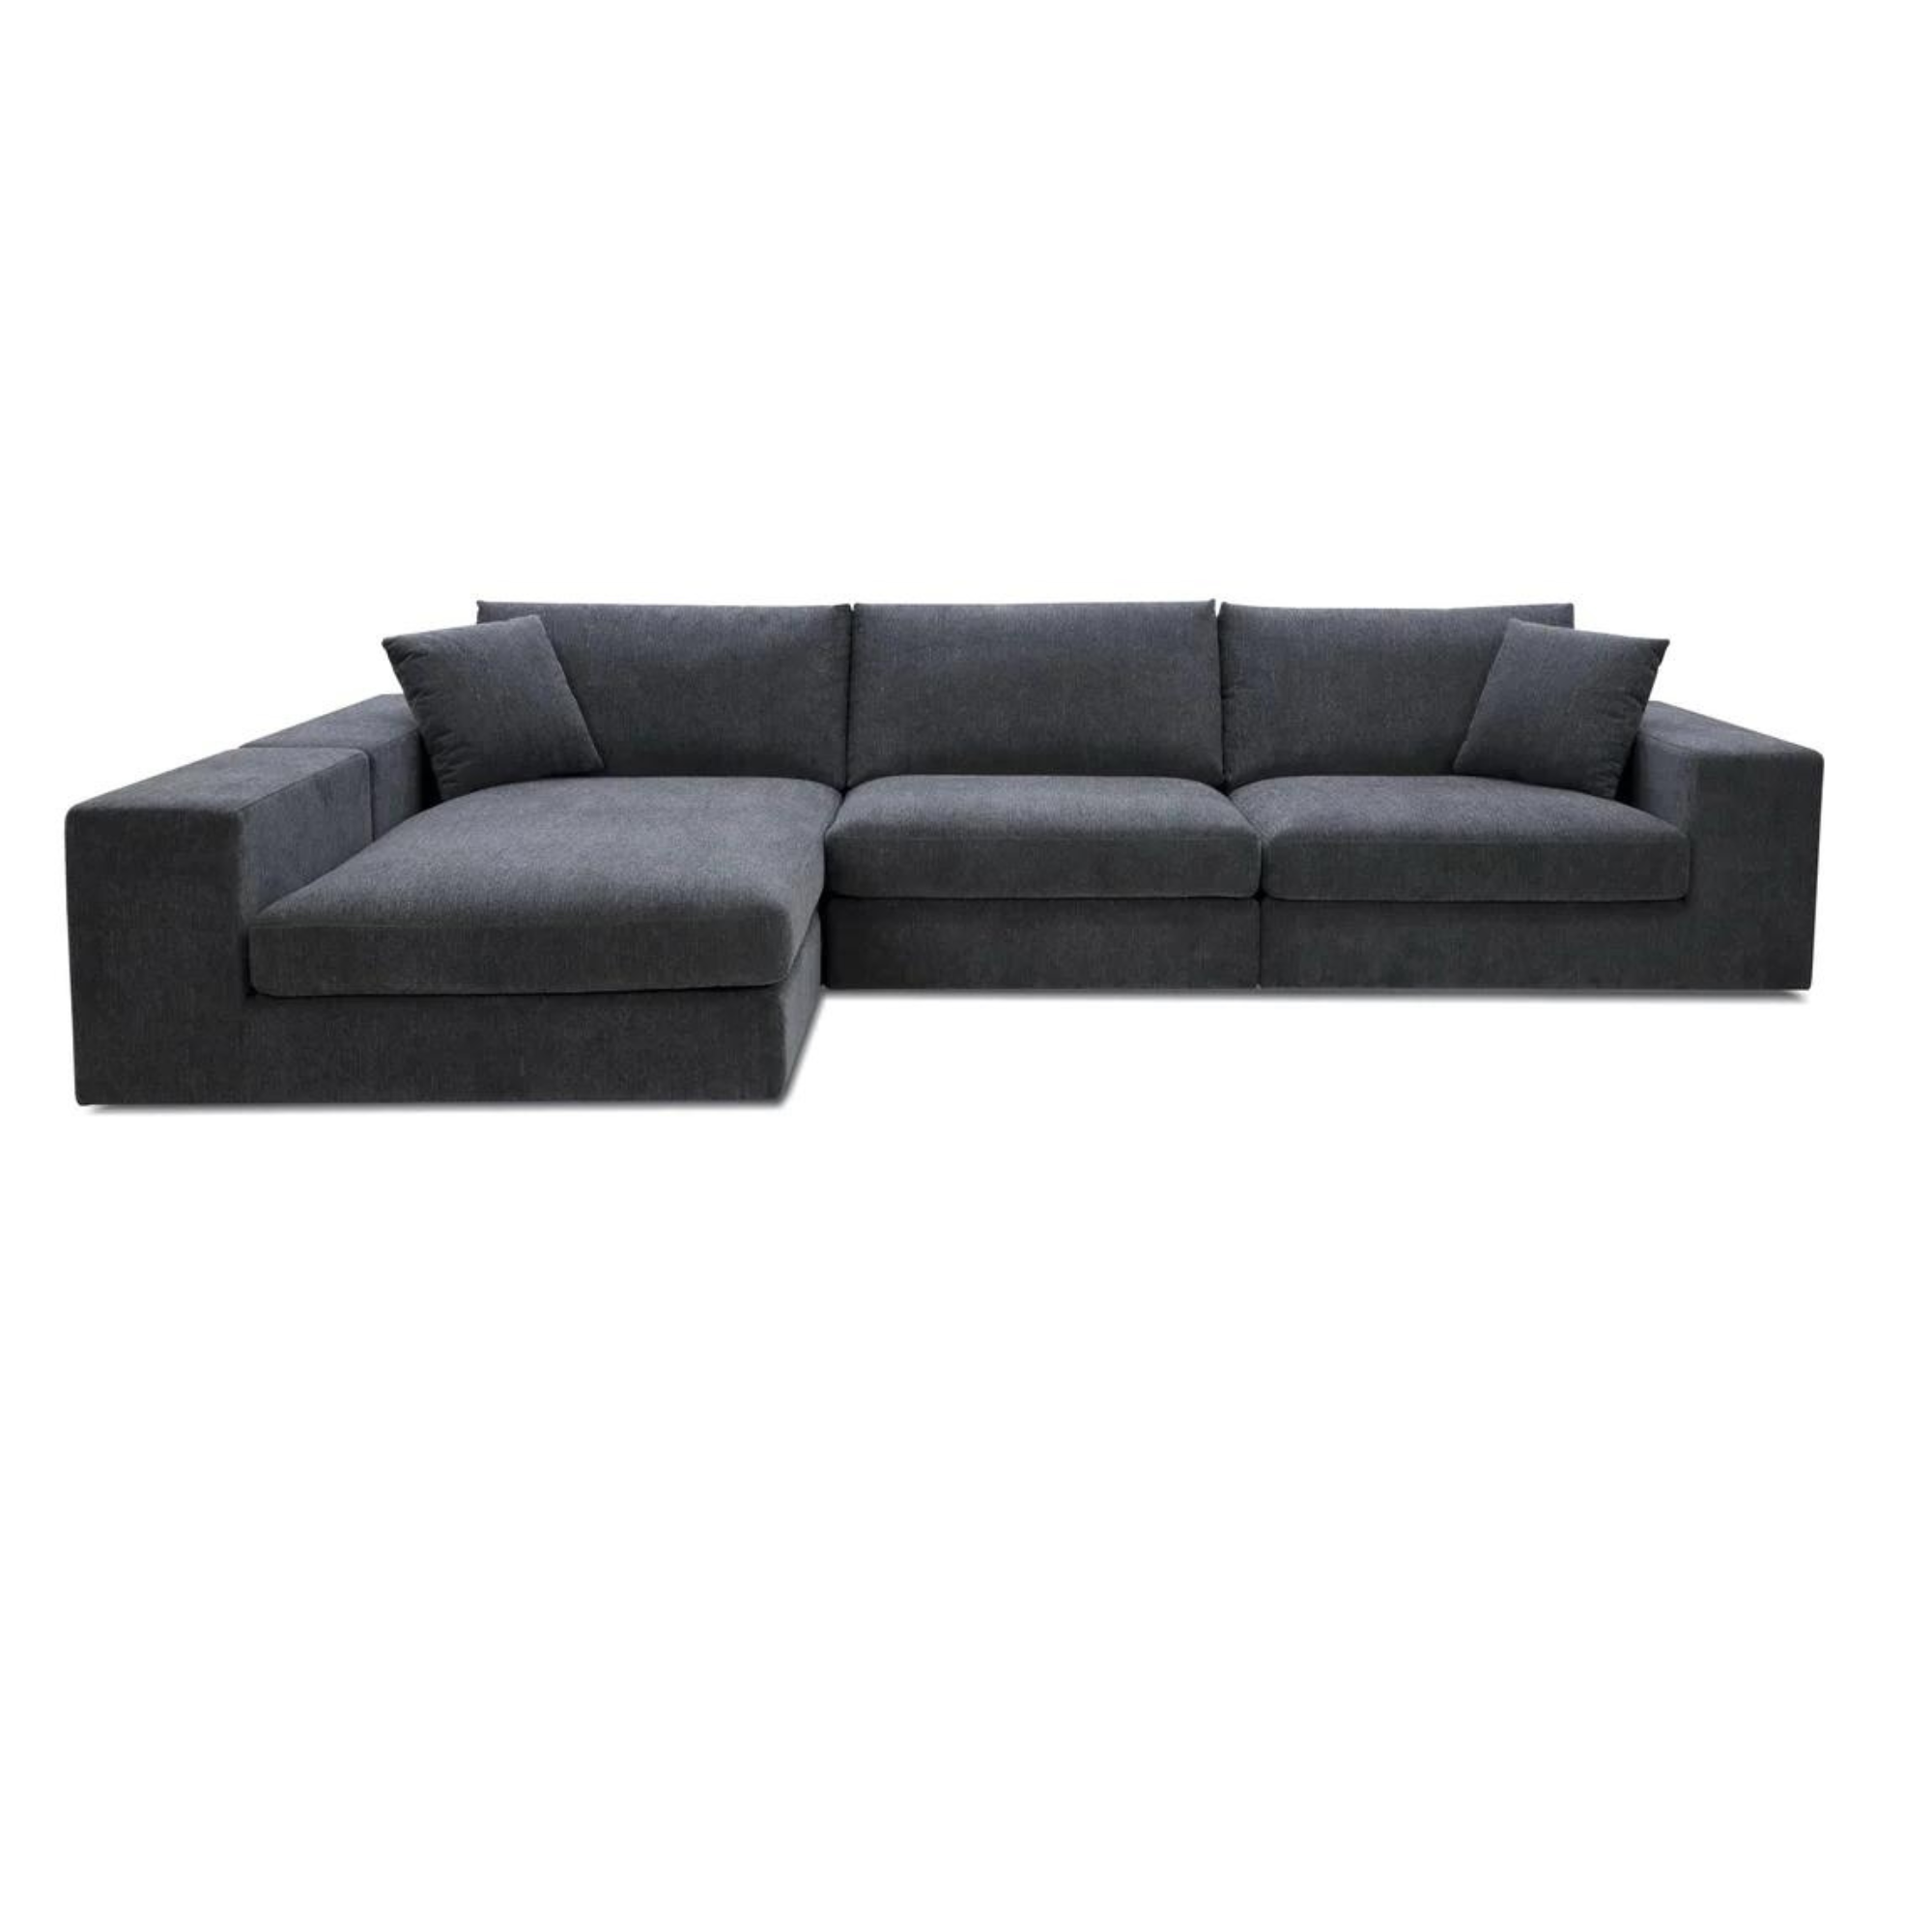 BENMORE REVERSIBLE CHAISE LOUNGE SUITE